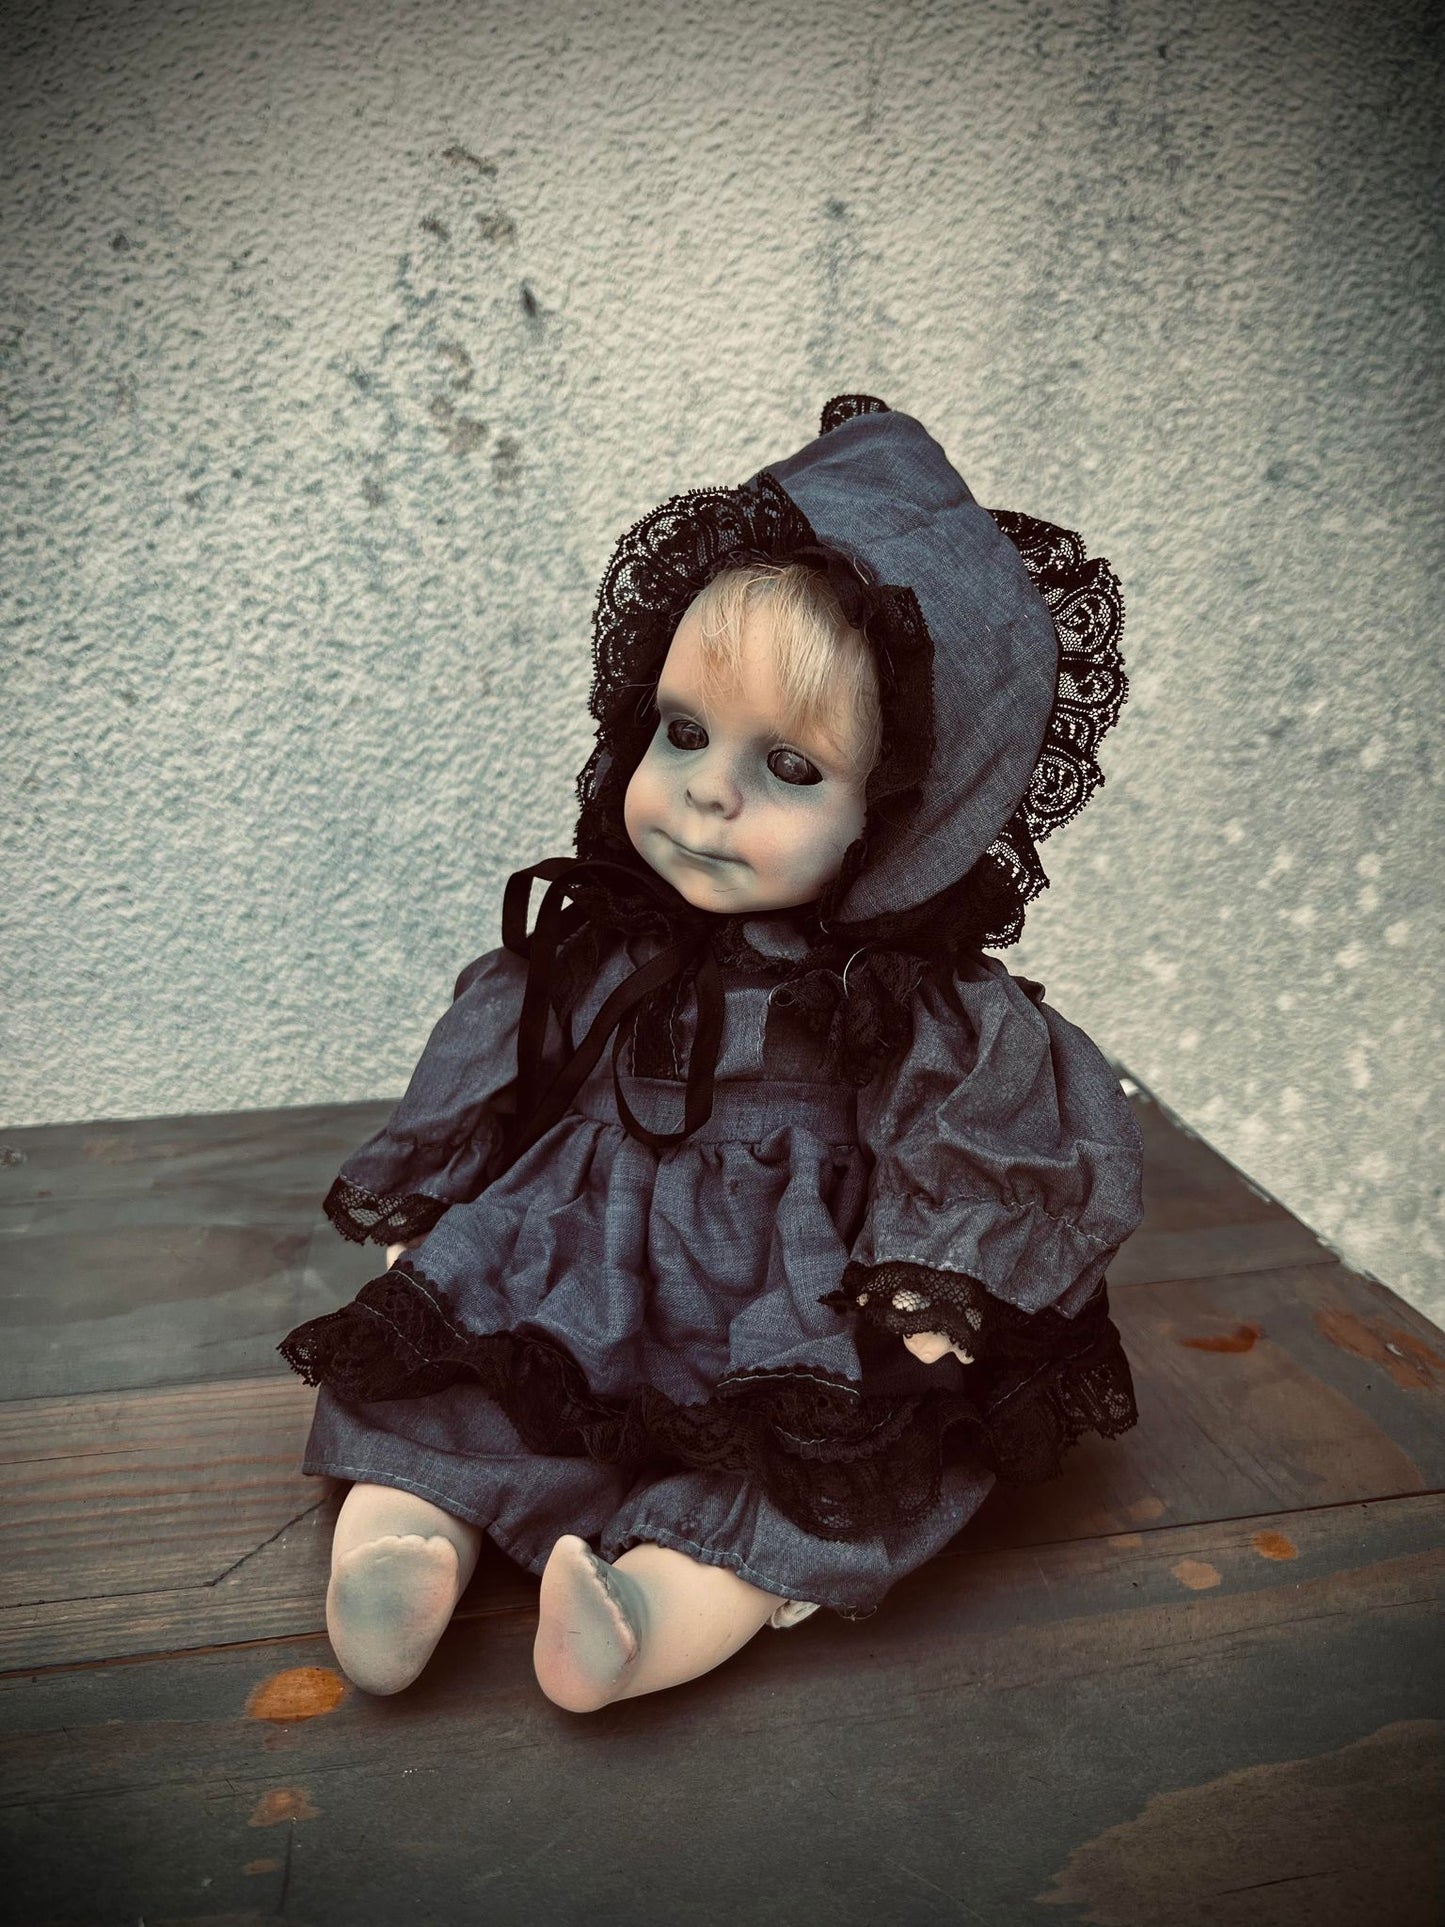 Meet Adeline 10" Doll Porcelain Witchy Creepy Haunted Spirit Infected Scary Spooky Possessed Positive Energy Oddity Gift Idea Vessel